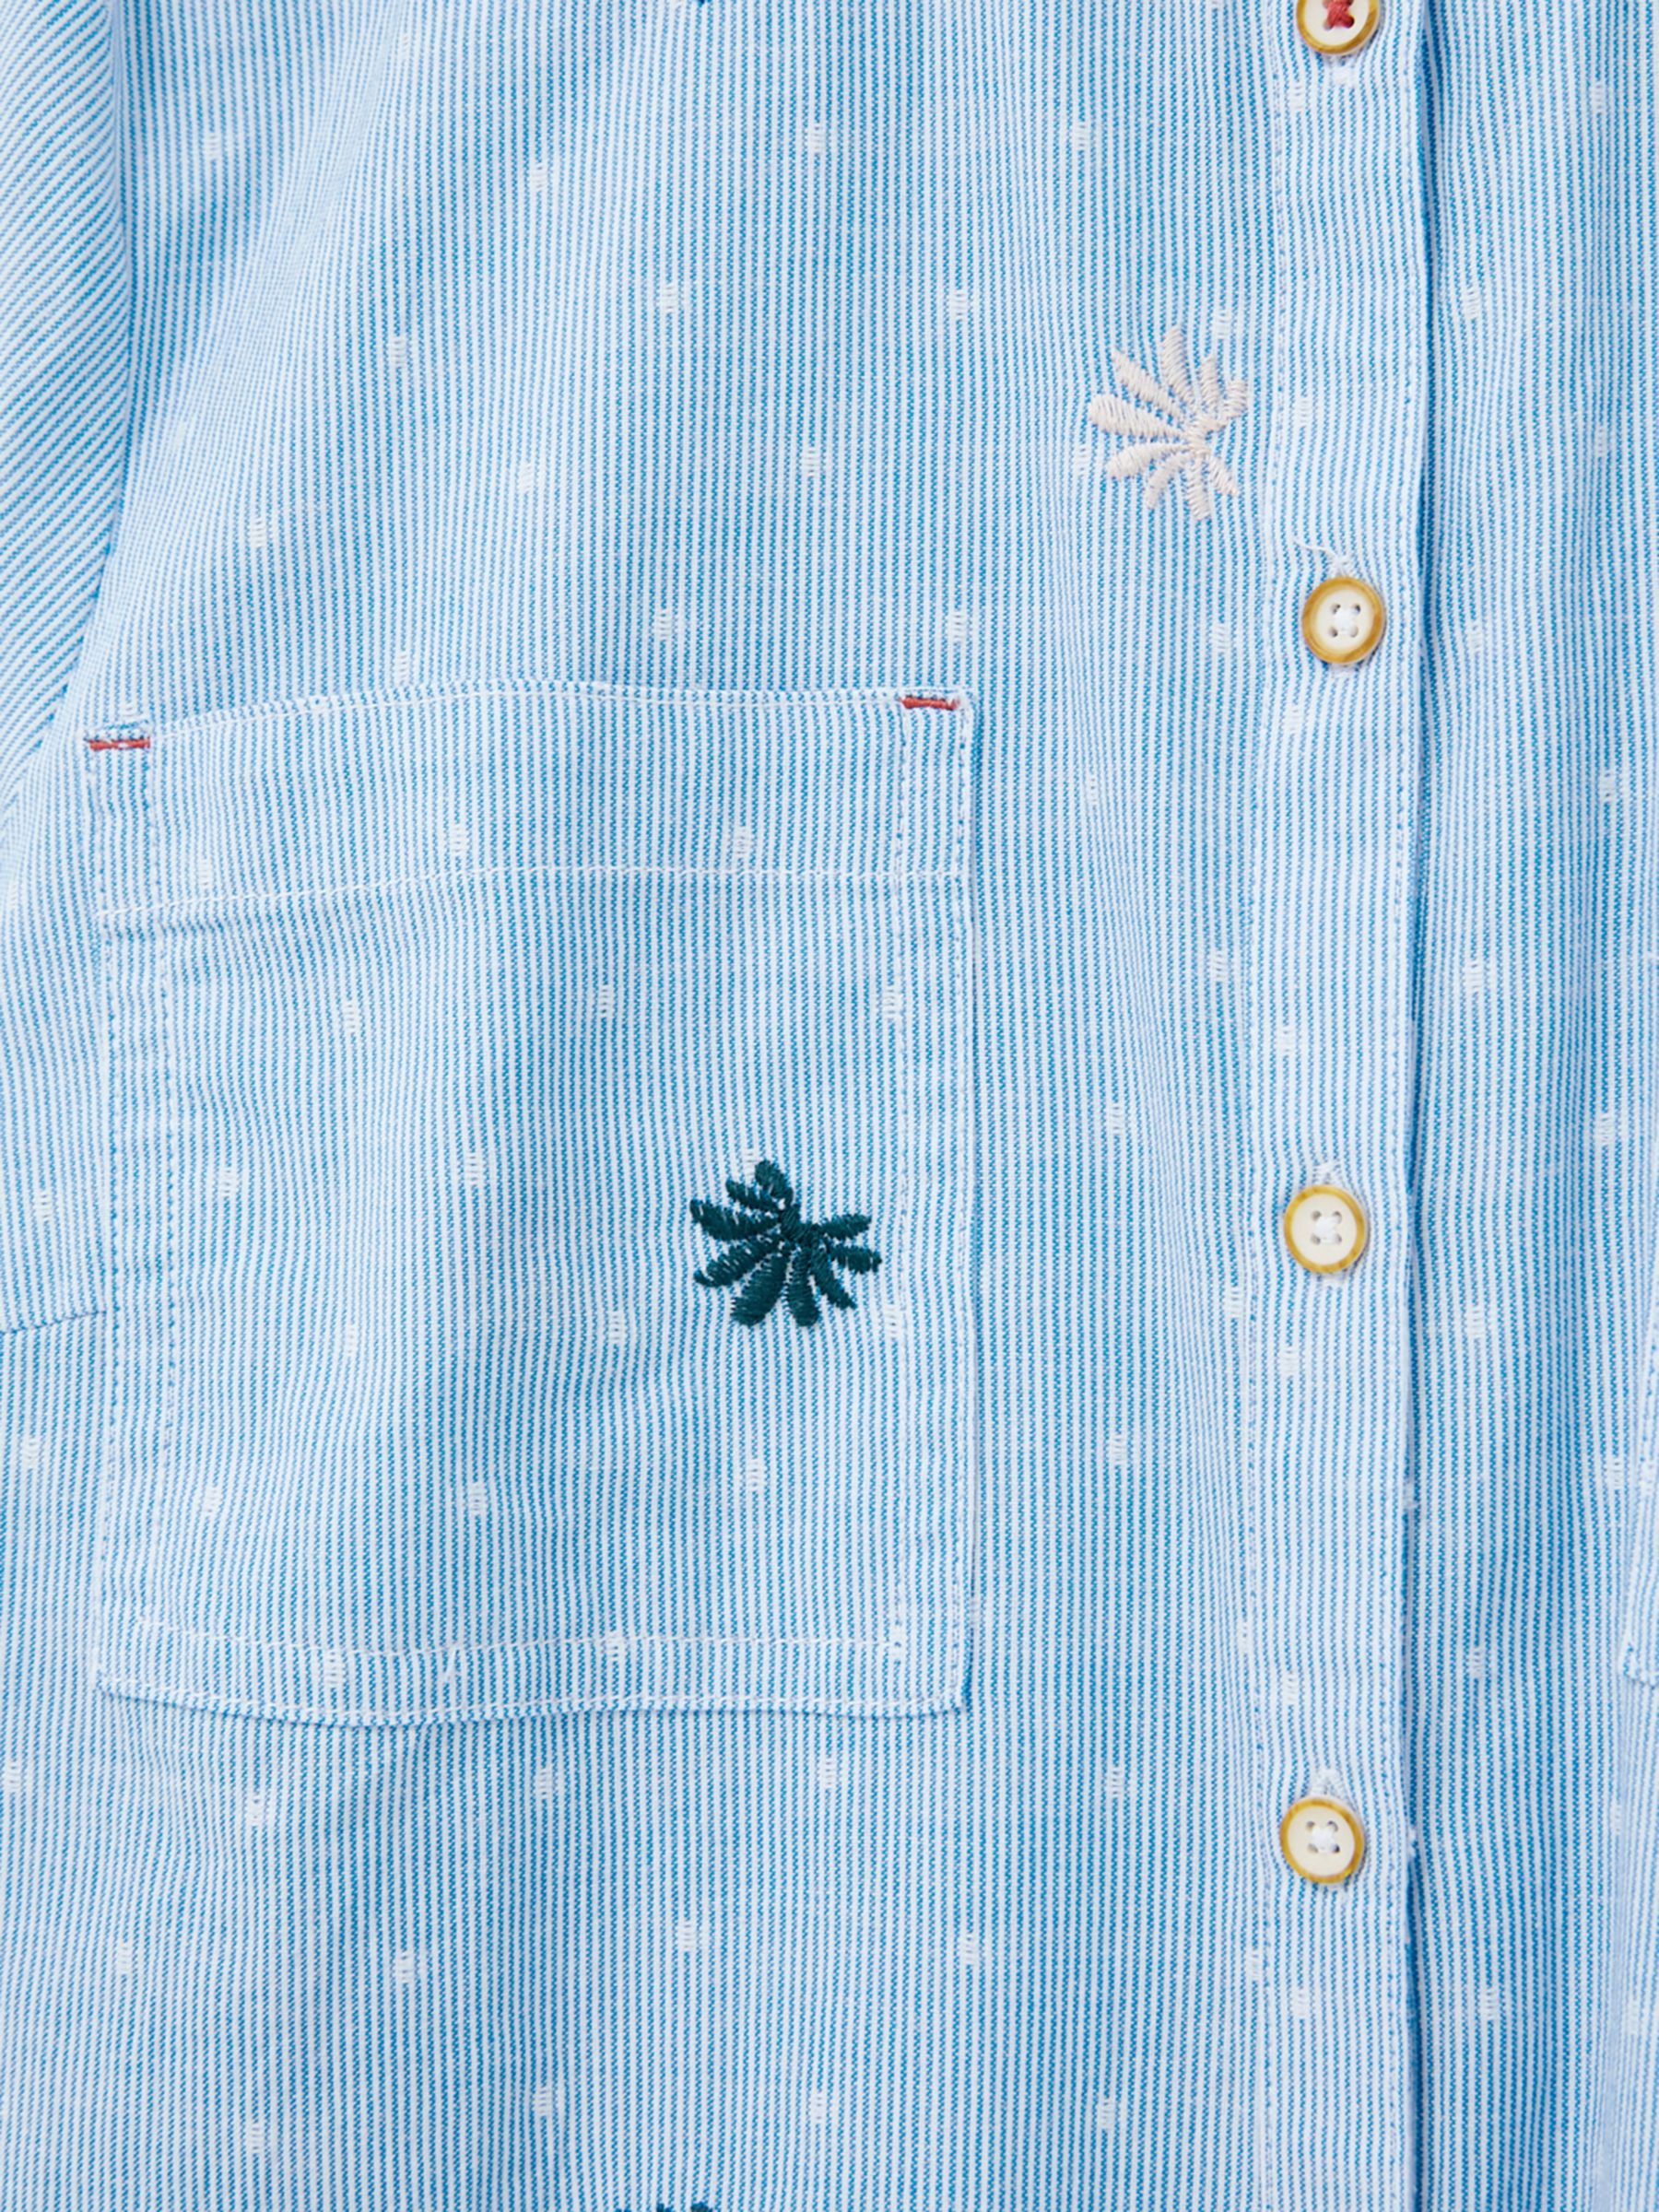 Buy White Stuff Sophie Embroidered Shirt, Blue/Multi Online at johnlewis.com